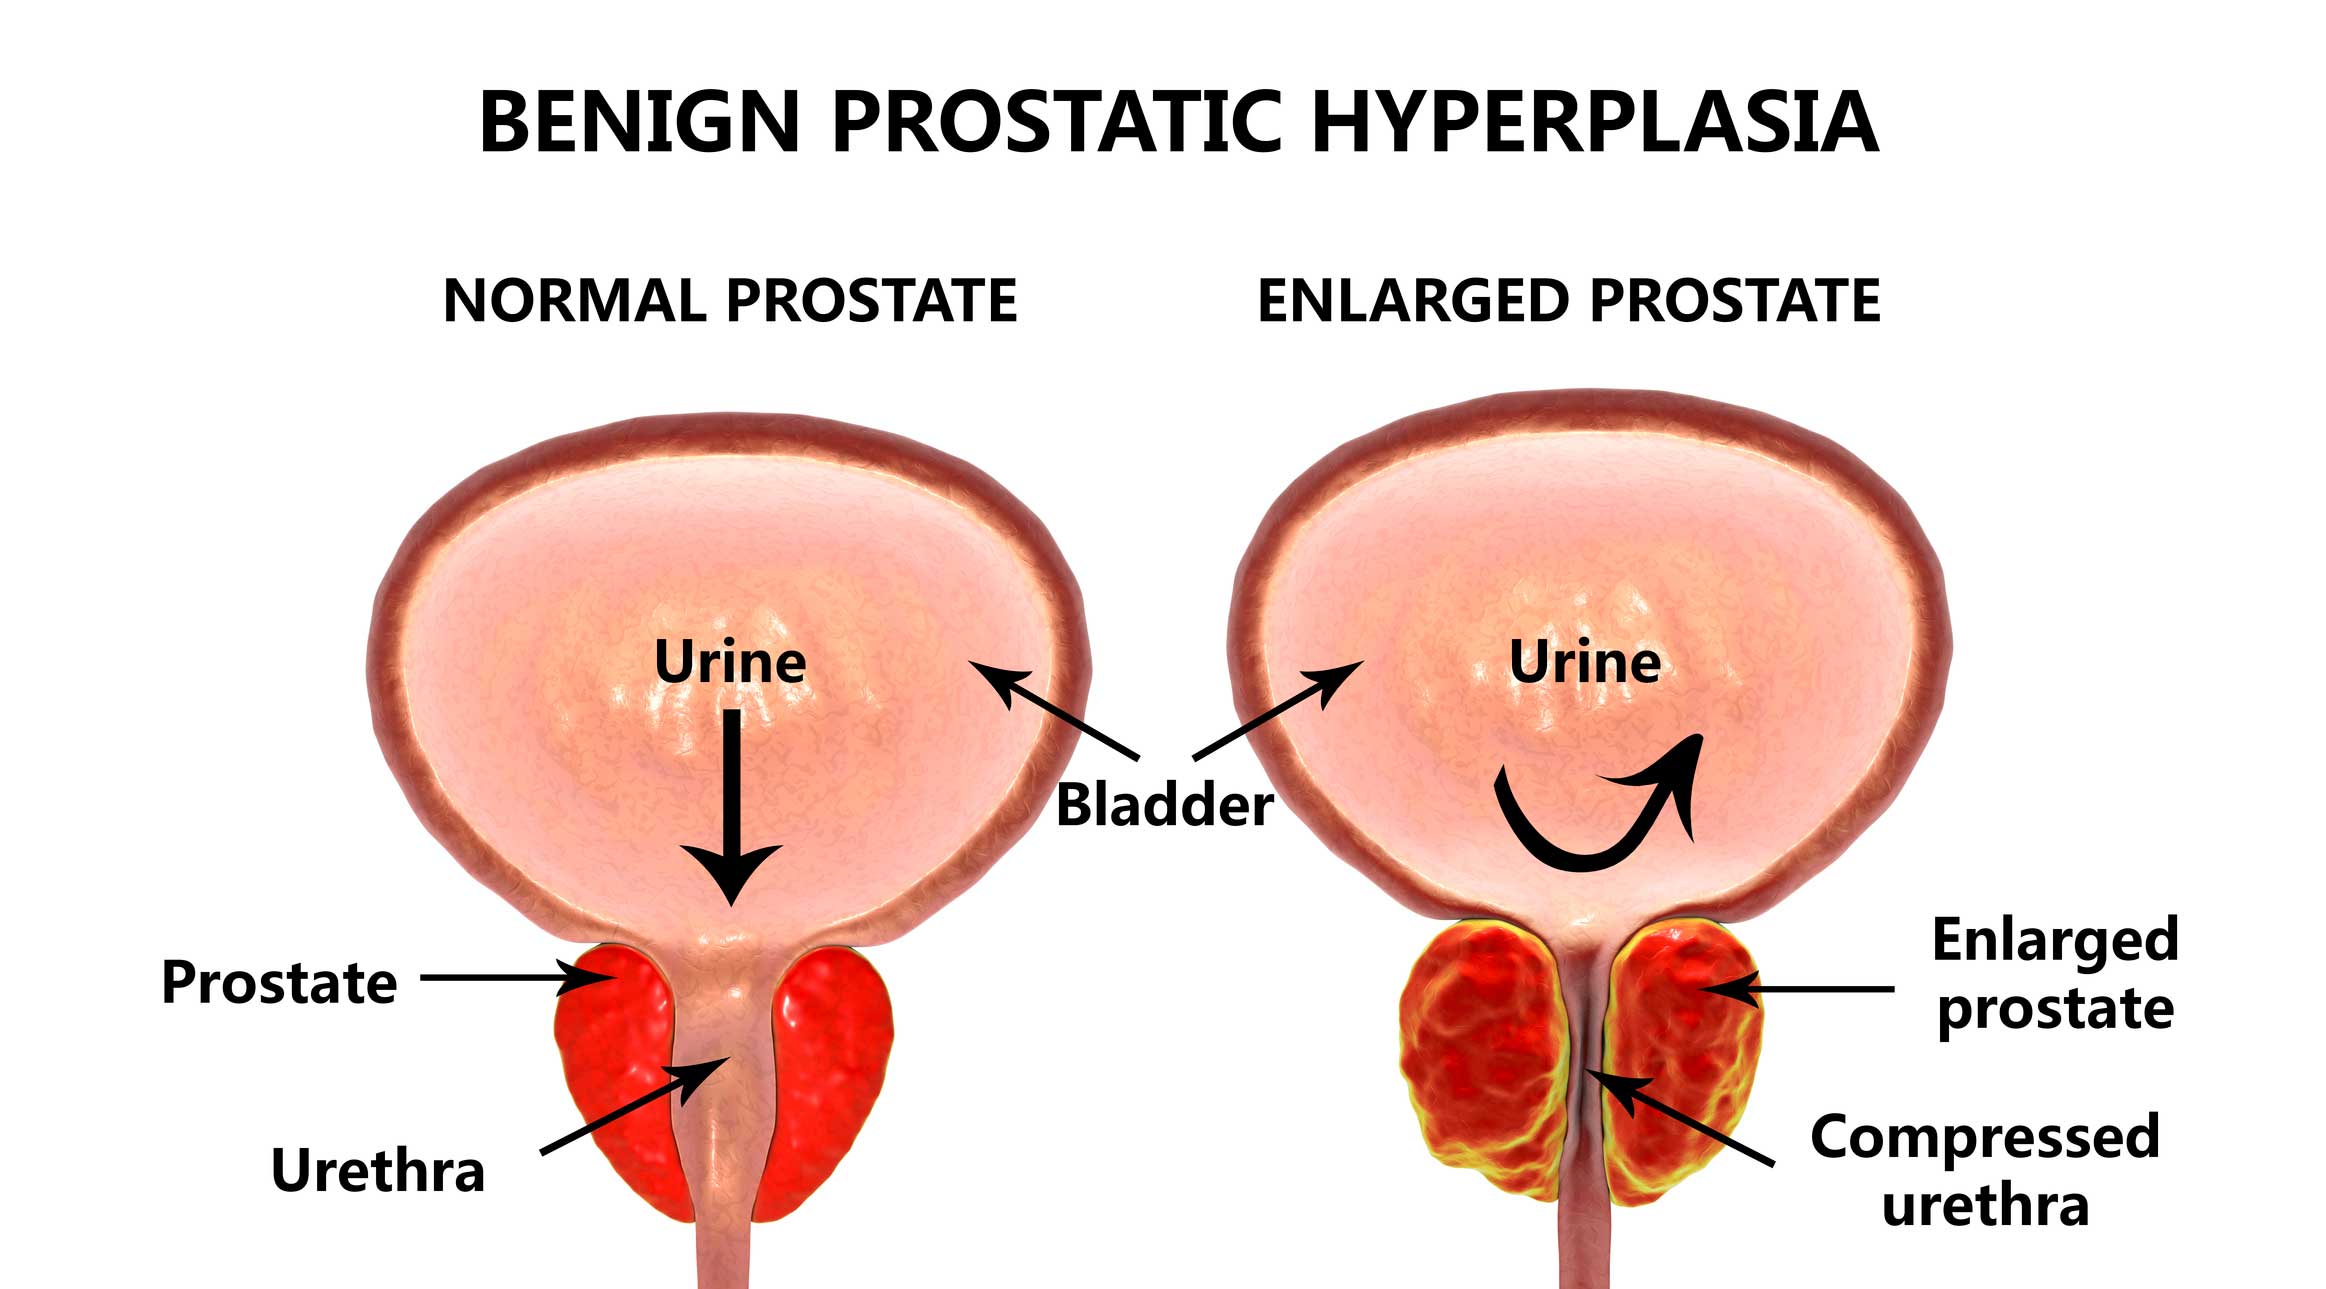 UroLift: New Relief From Enlarged Prostate